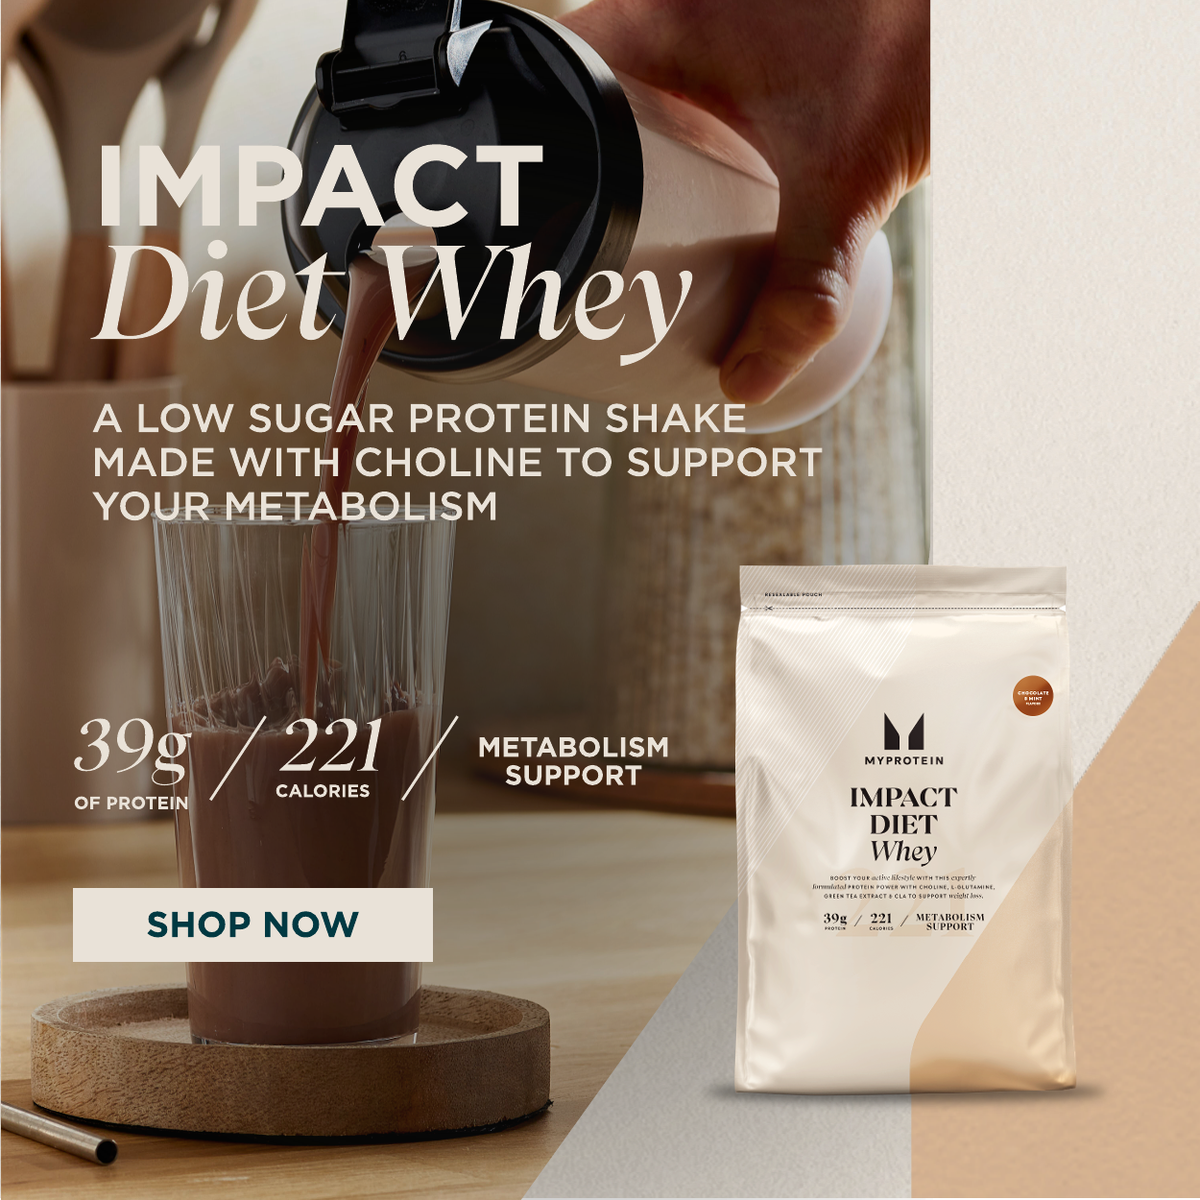 Discover Impact Diet Whey Protein, packed with 39 grams of protein & only 221 calories. shop now.